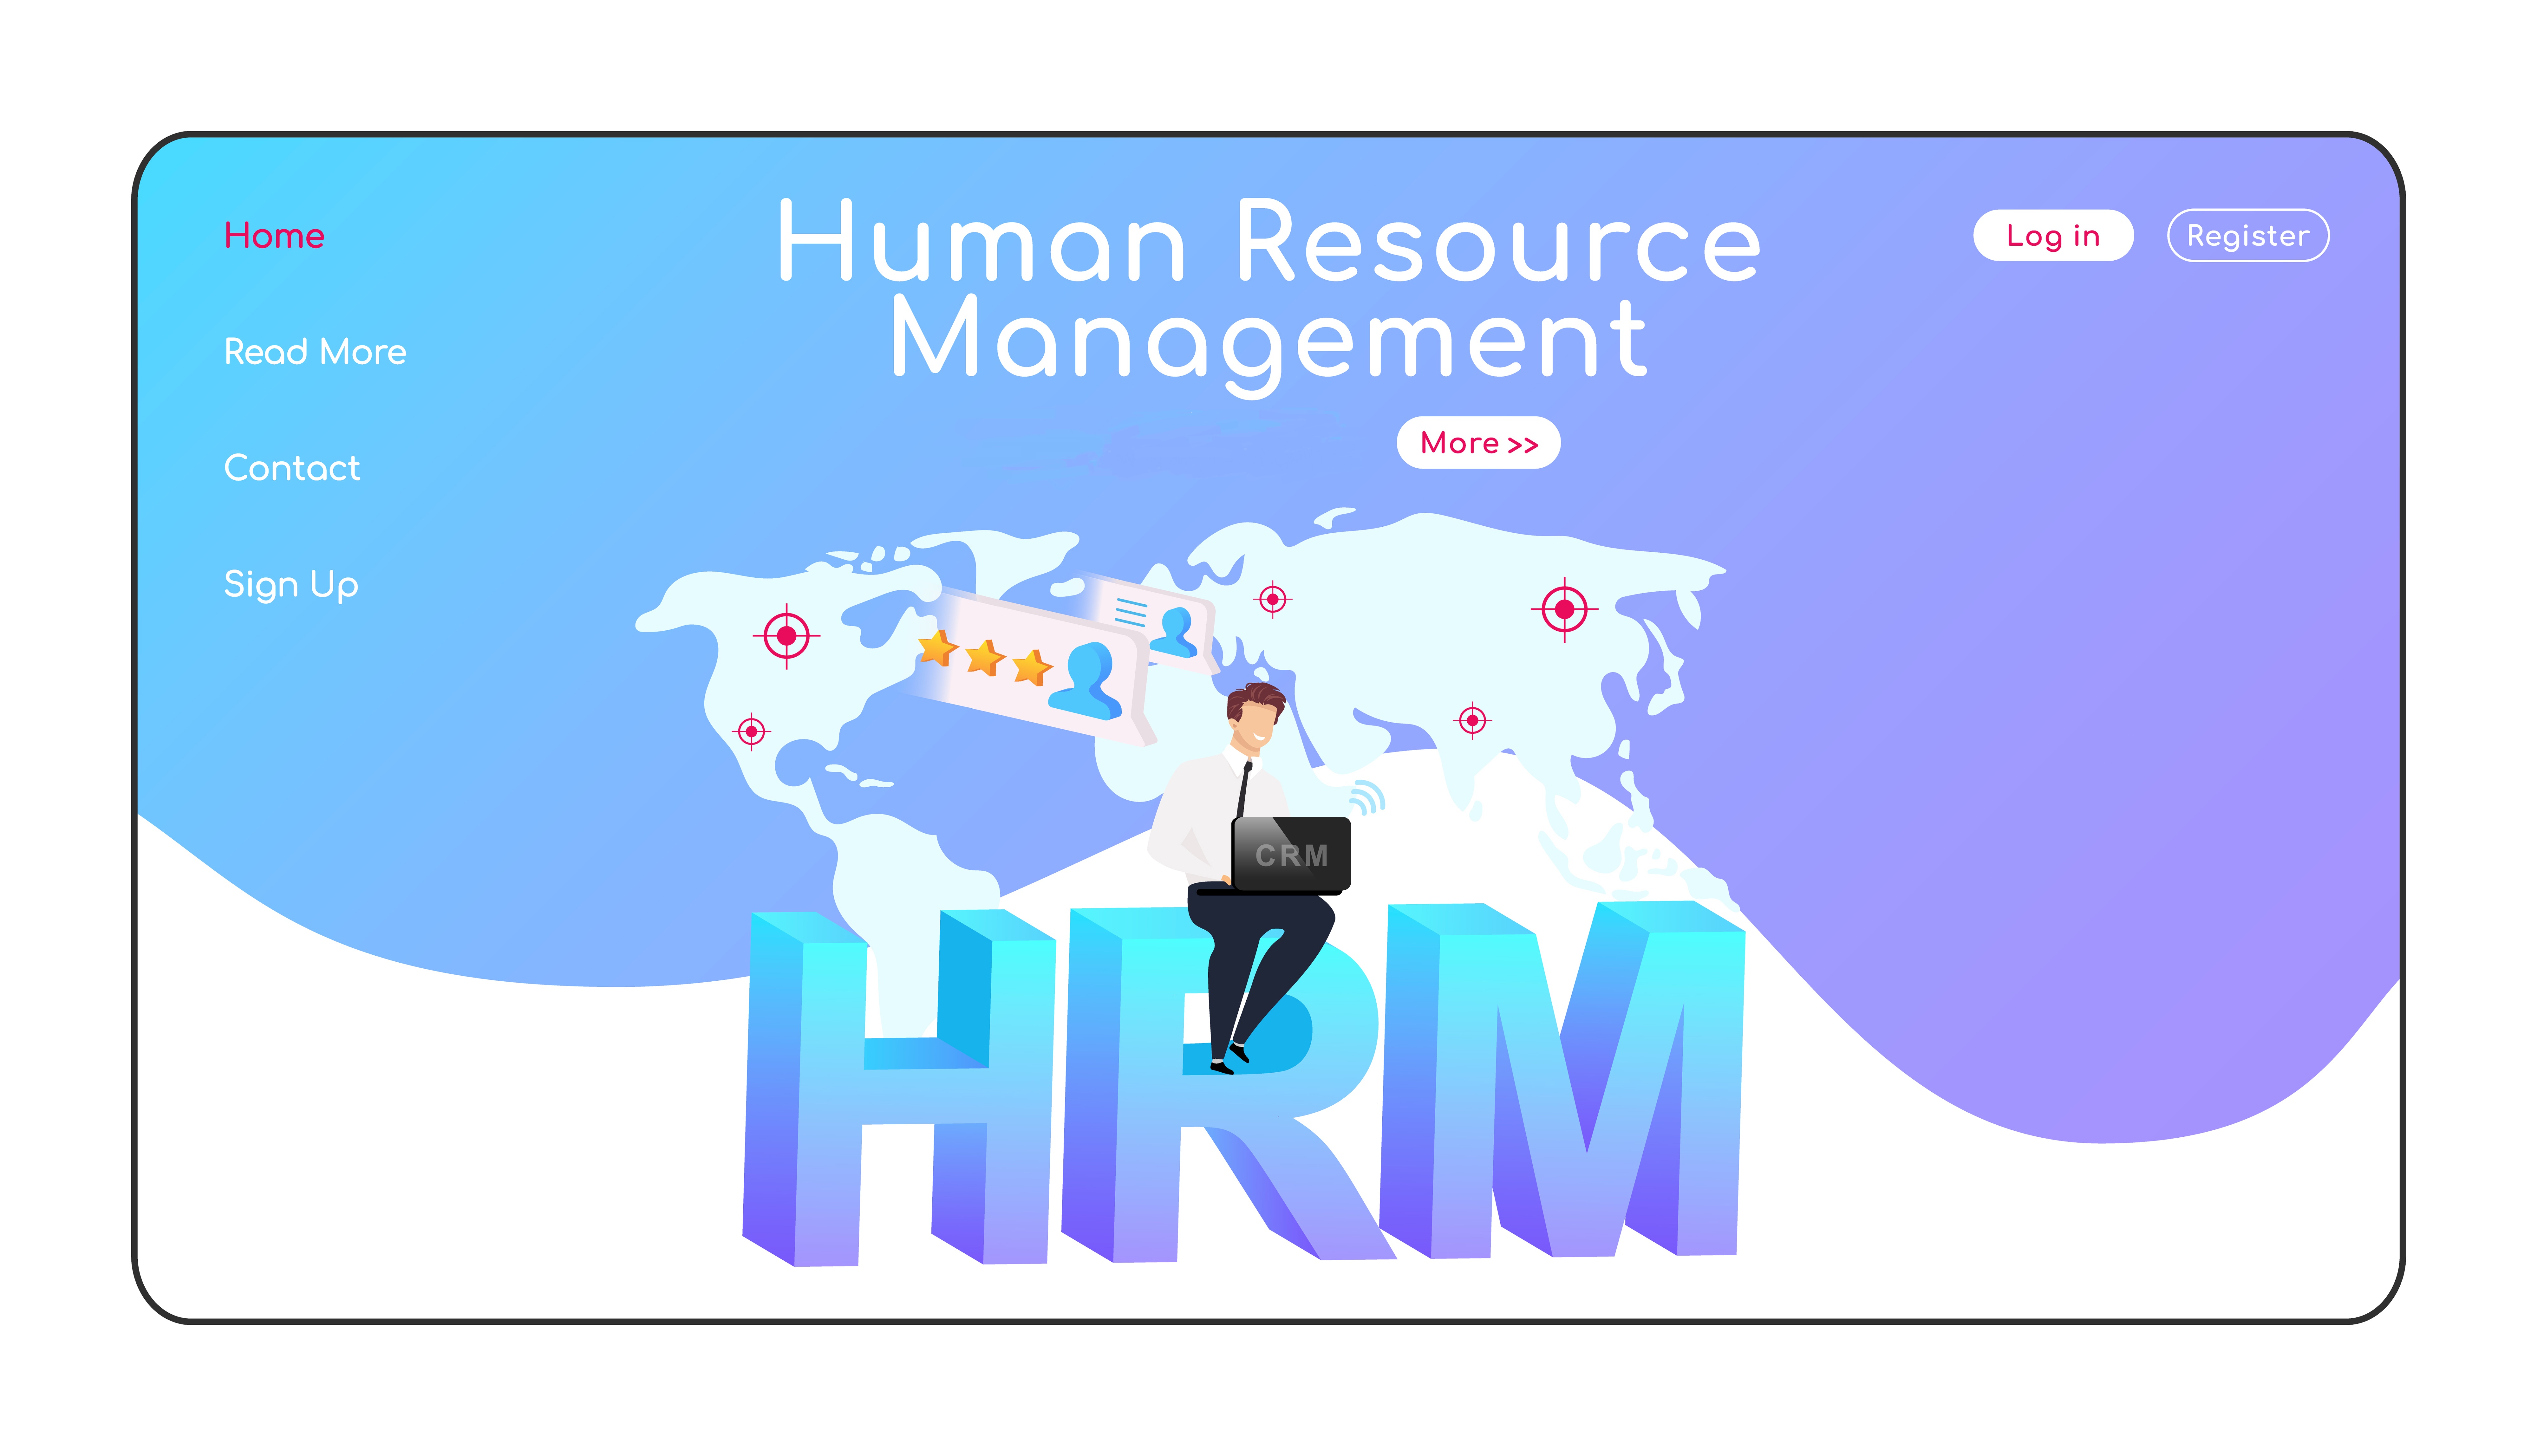 WHY HR IS THE KEY TO YOUR COMPANY'S SUCCESS